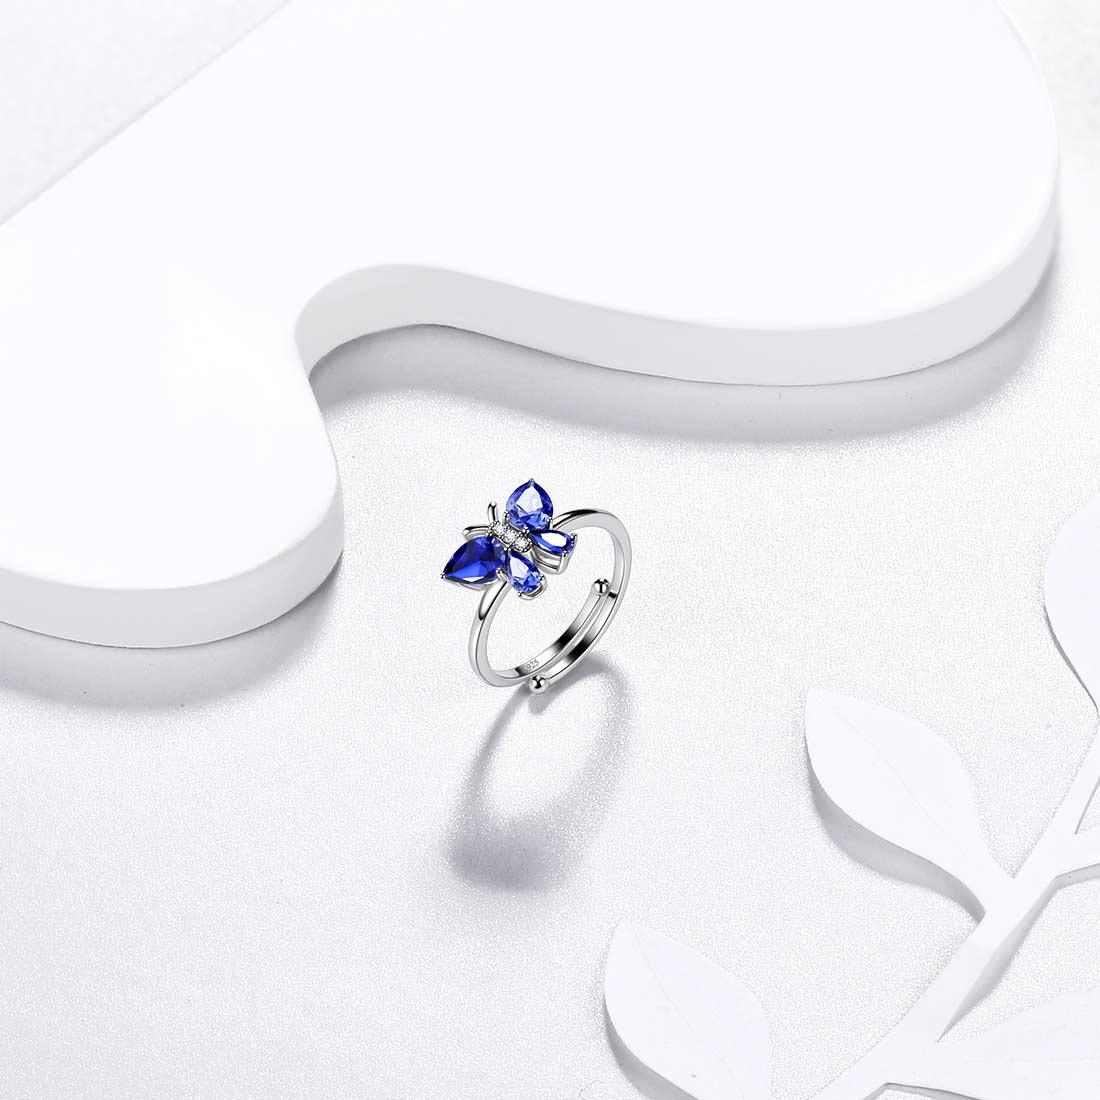 Butterfly Ring Band Birthstone September Sapphire Adjustable - Rings - Aurora Tears